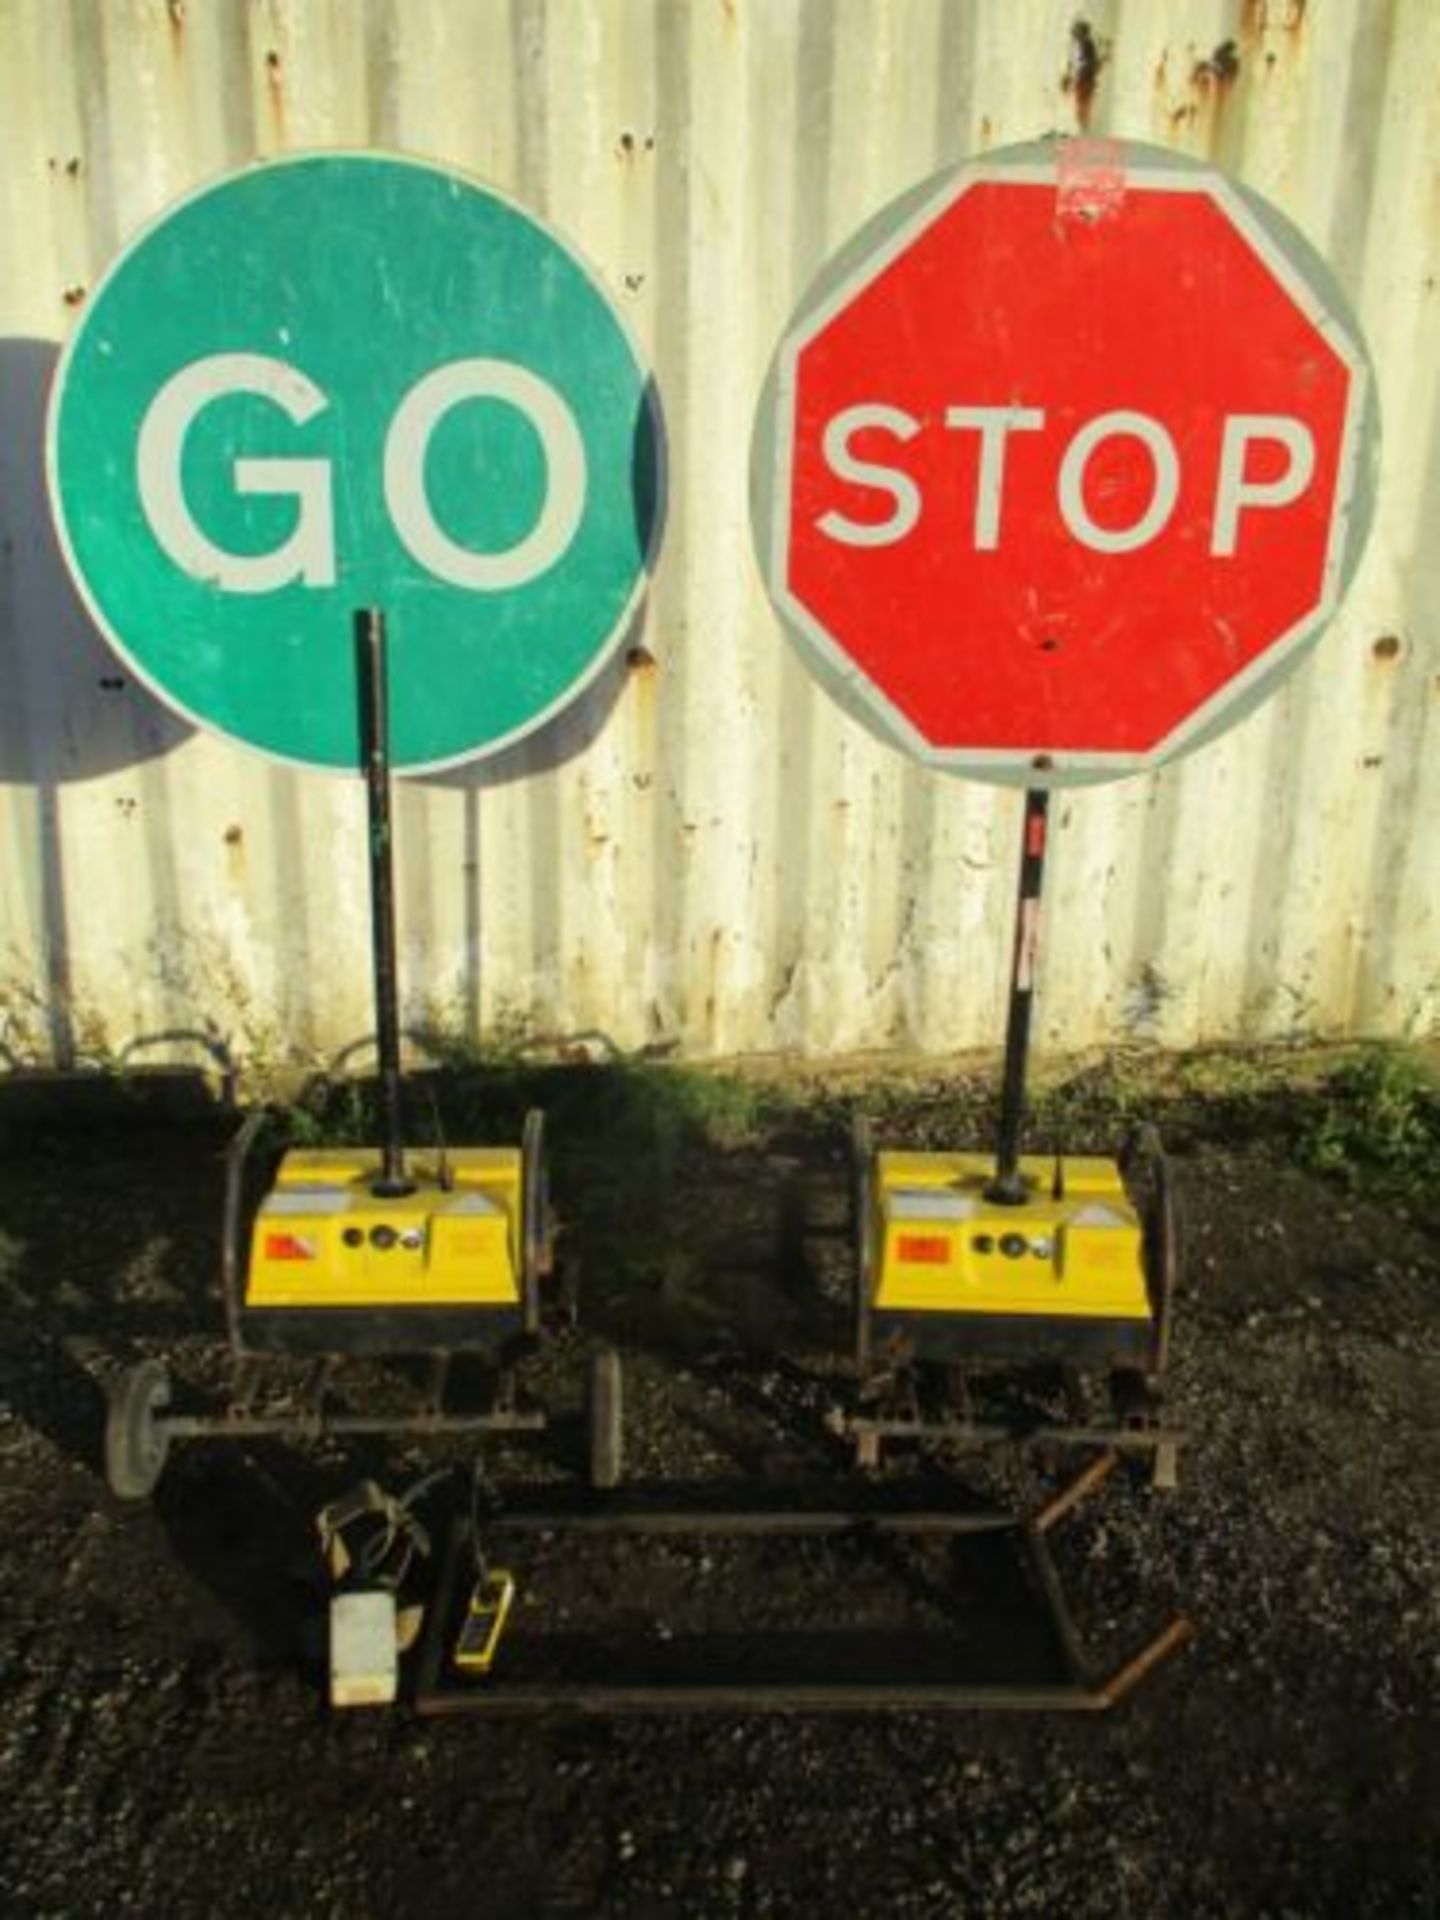 PIKE ROBOSIGN STOP GO BOARDS TRAFFIC LIGHTS SIGN LIGHT BATTERY 2 WAY DELIVERY - Image 3 of 4